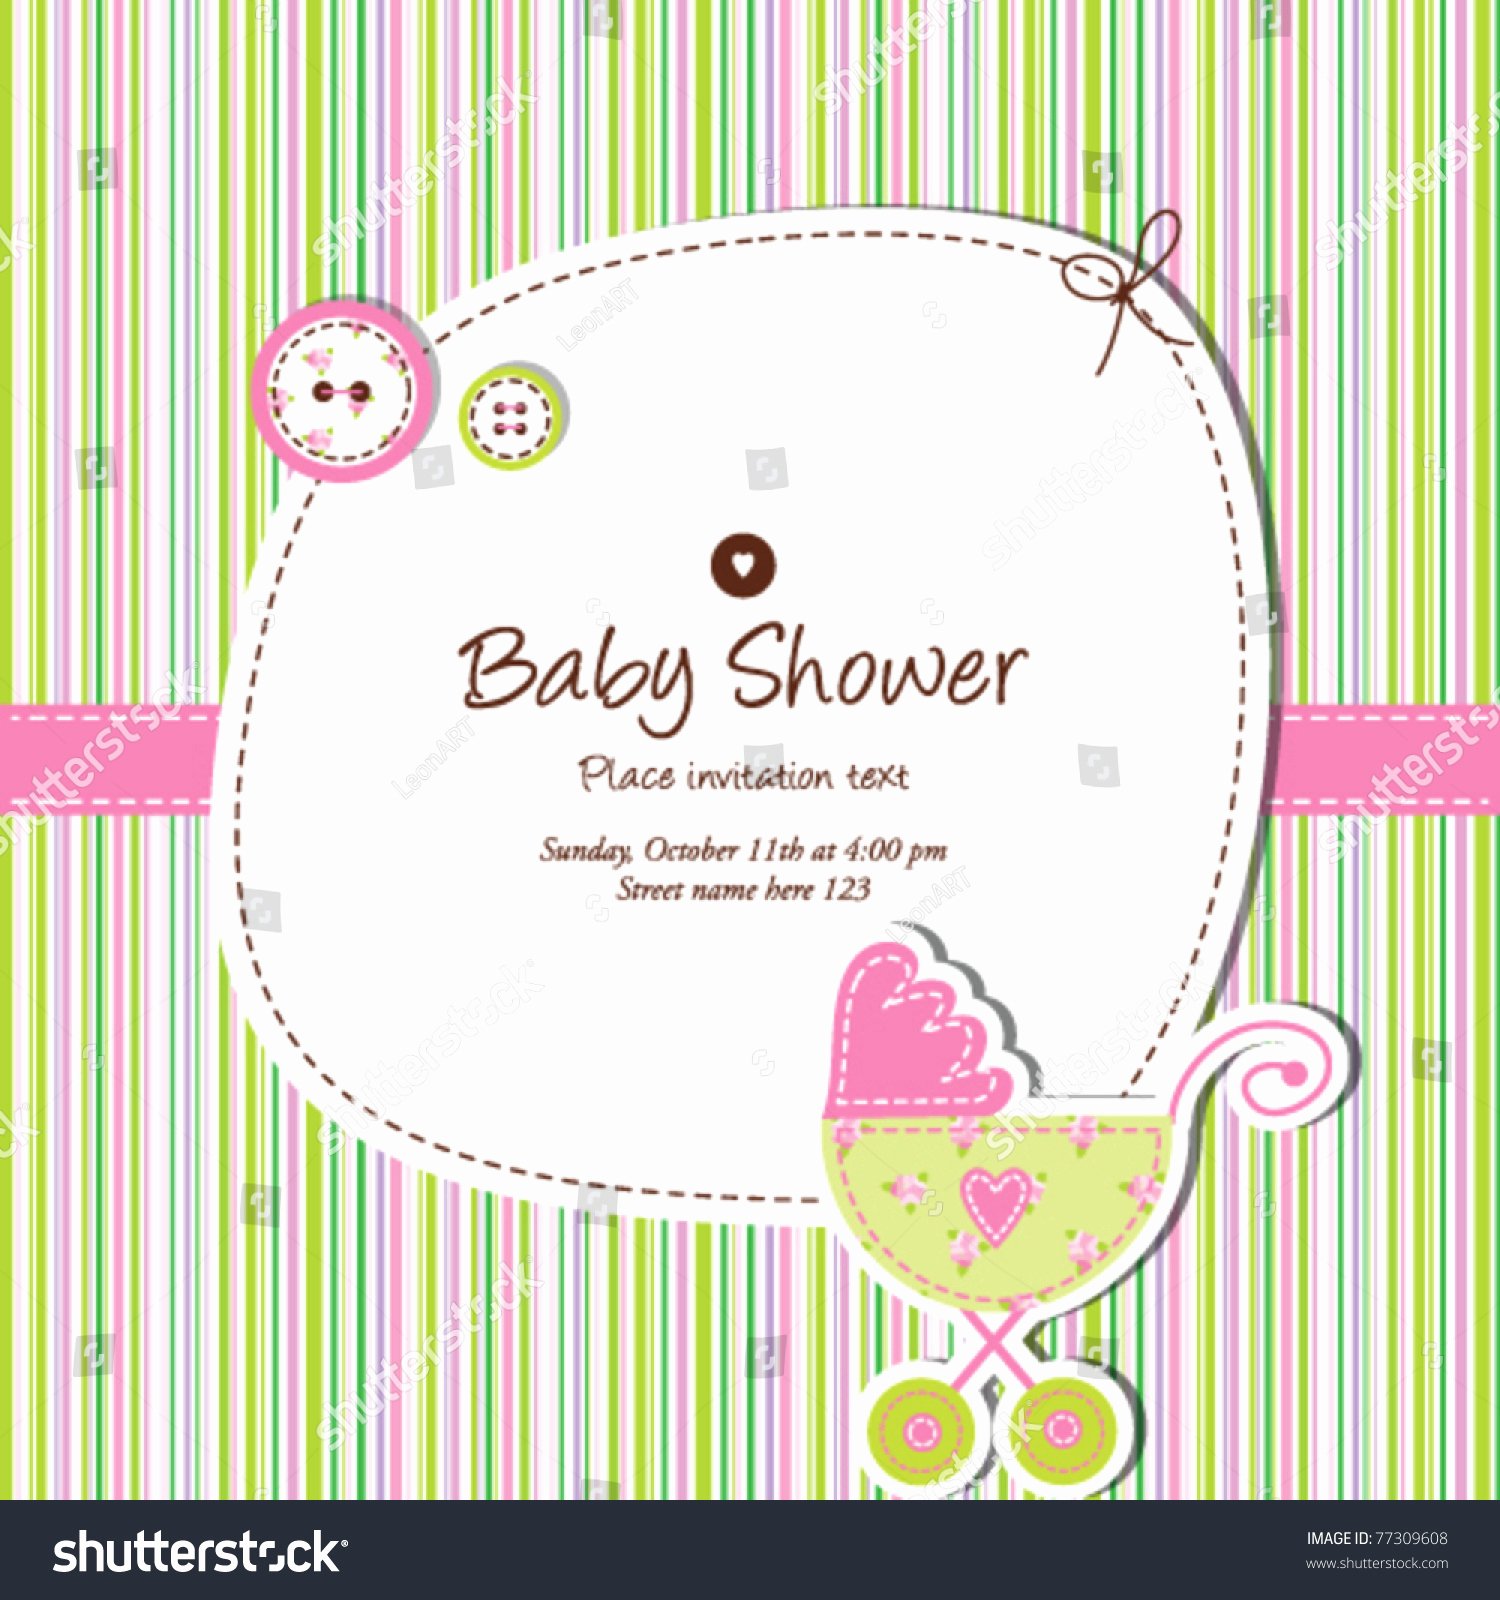 Baby Shower Invitation Template Cute Vector Stock Vector